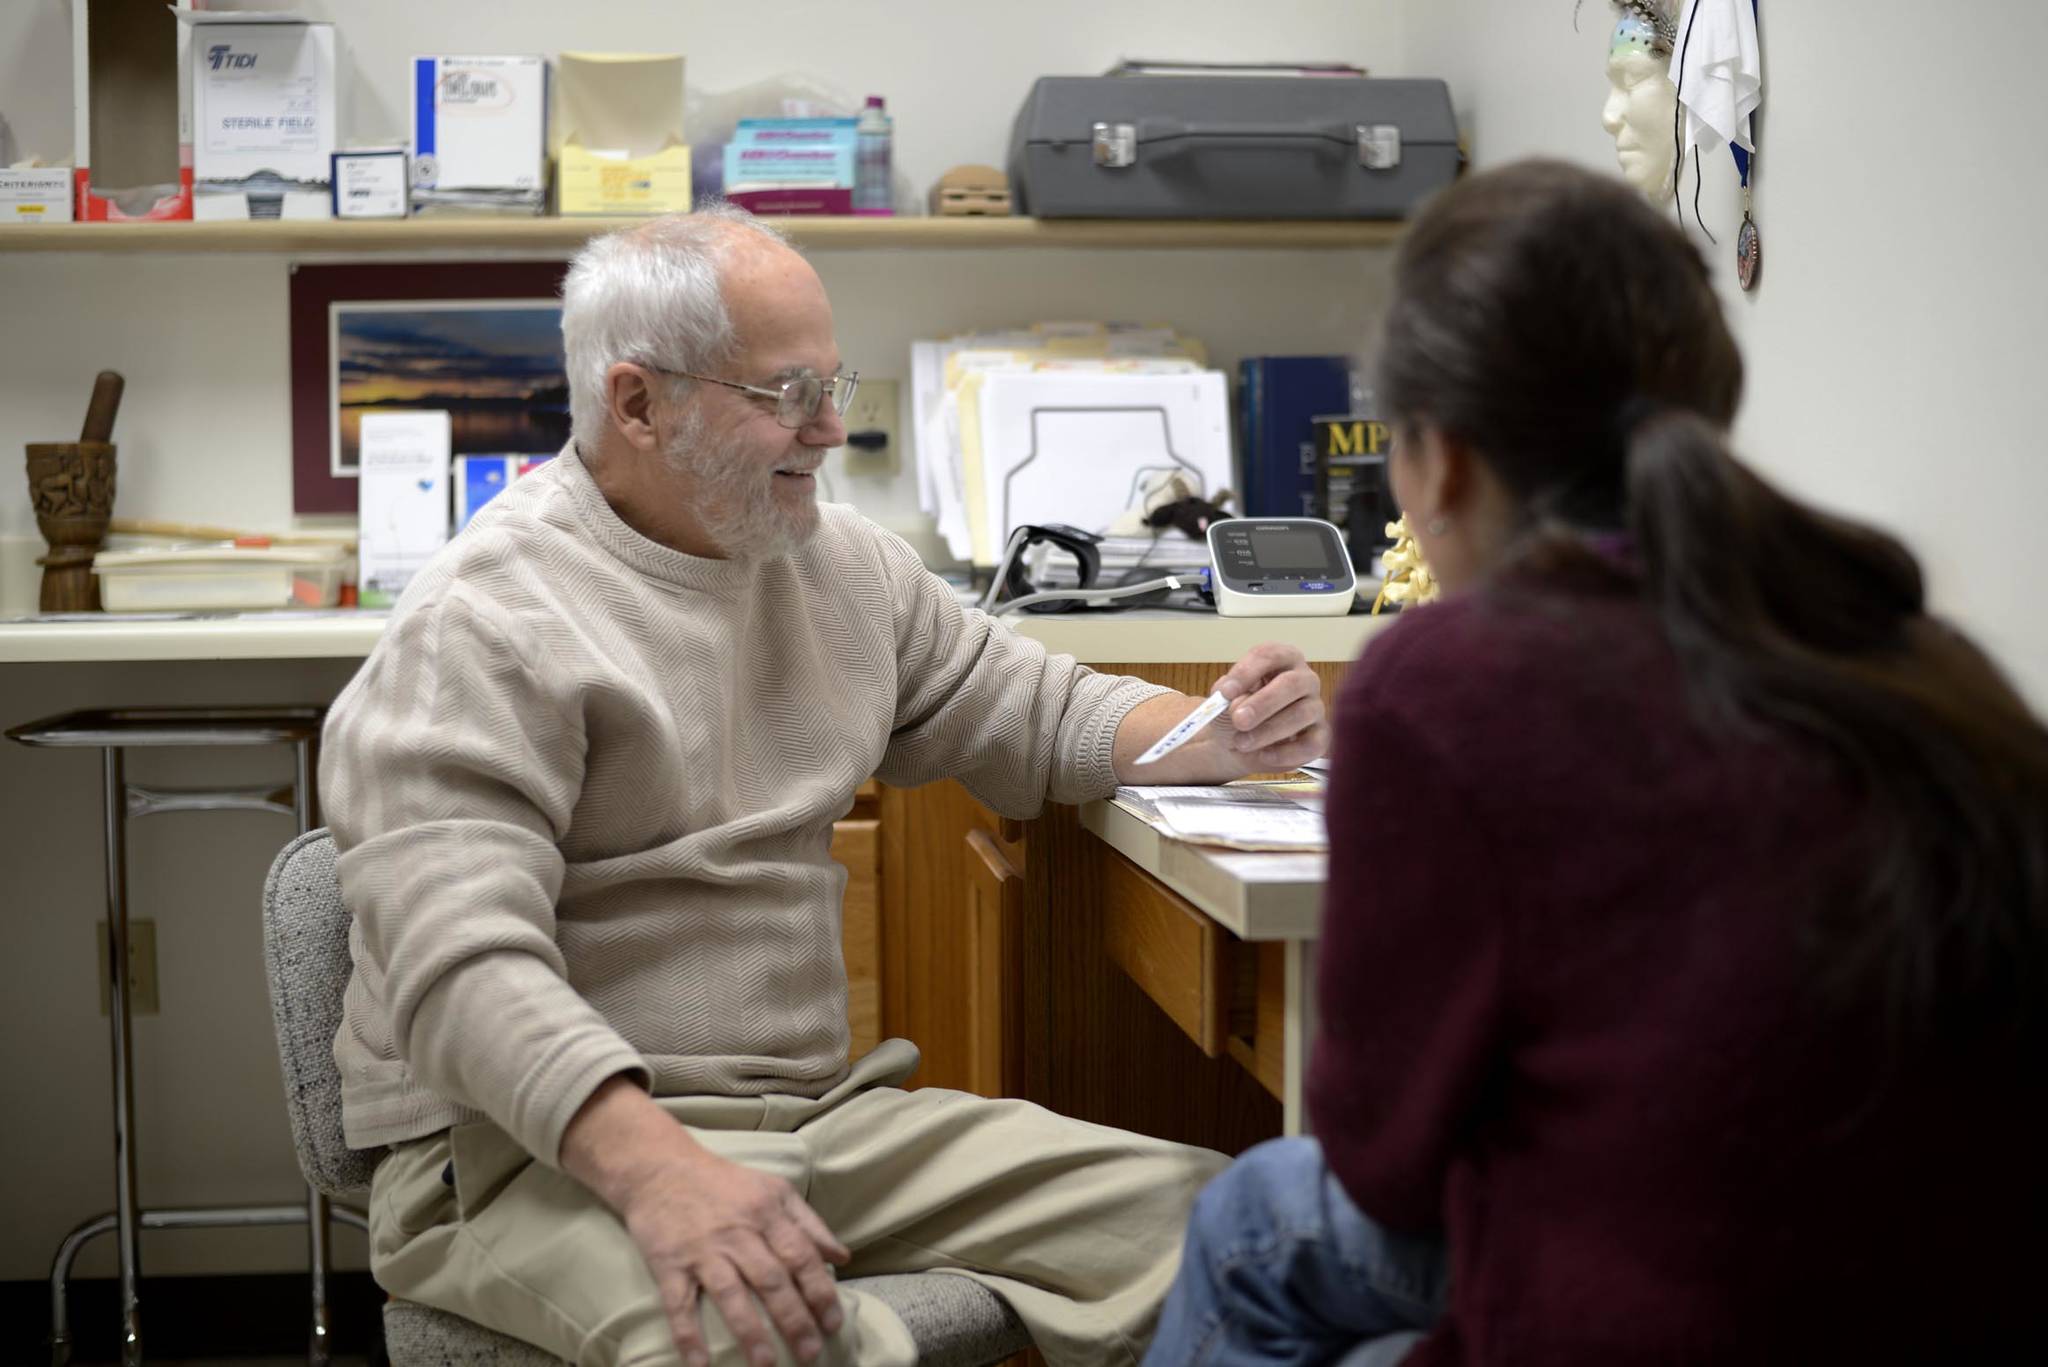 In this Dec. 23, 2015 photo, Dr. Michael Merrick talks to a patient about her addiction as she comes in to get her prescription of Suboxone, a medicine used to treat opioid addictions, in Merrick’s office in Kenai, Alaska. (Clarion file photo)